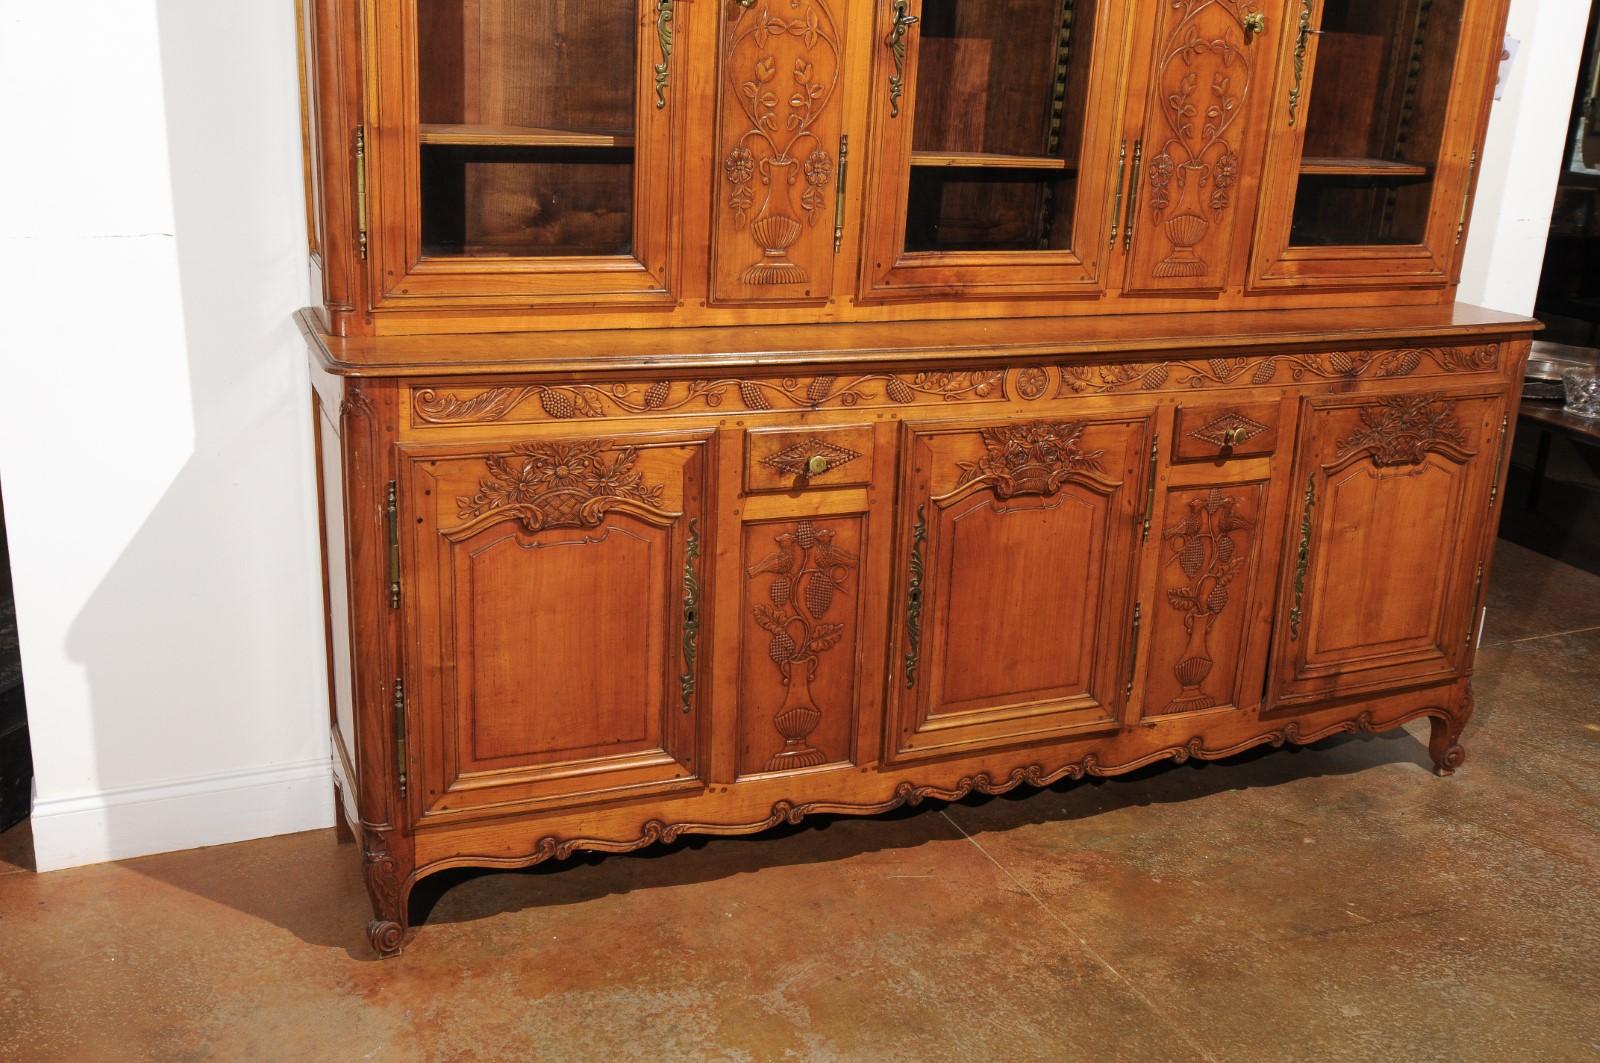 A French Restauration period walnut vitrine enfilade from the early 19th century, with bonnet-shaped cornice, foliage, agricultural tool motifs, glass doors and hidden panels. Born in France during the second decade of the 19th century, this walnut